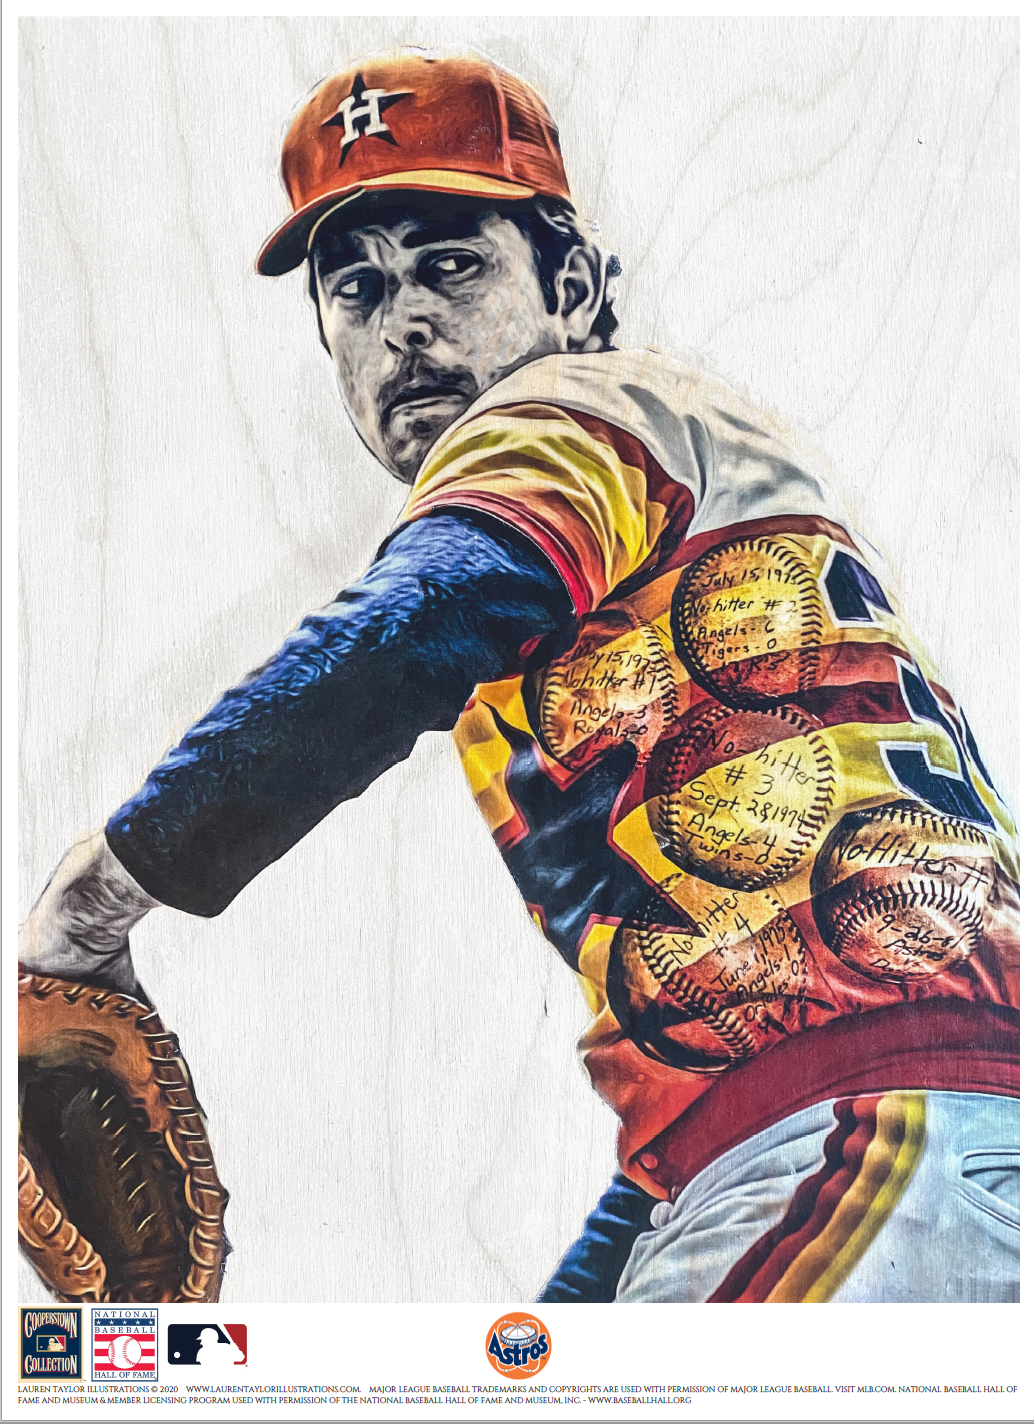 "No Hitter" (Nolan Ryan) Houston Astros - Officially Licensed MLB Cooperstown Collection Print - Limited Release